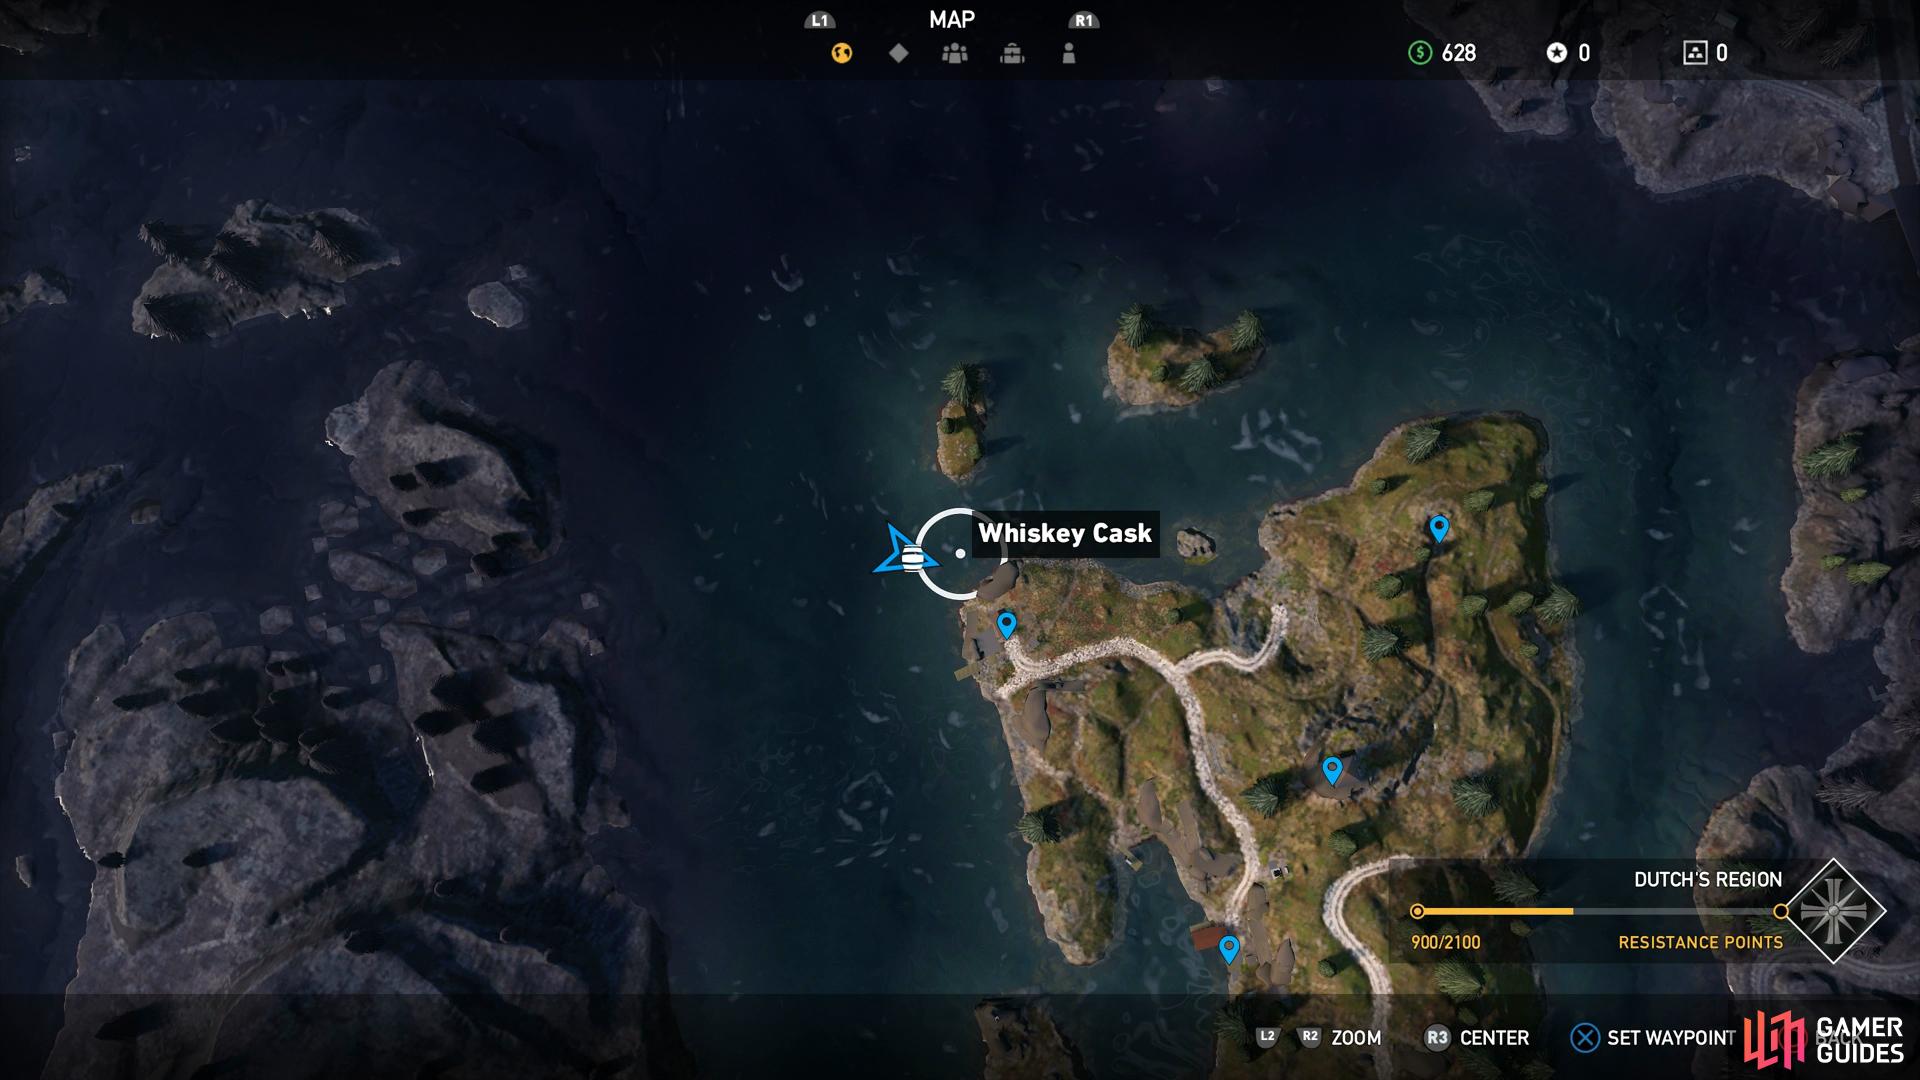 Search the small island north of the Forest Research Station